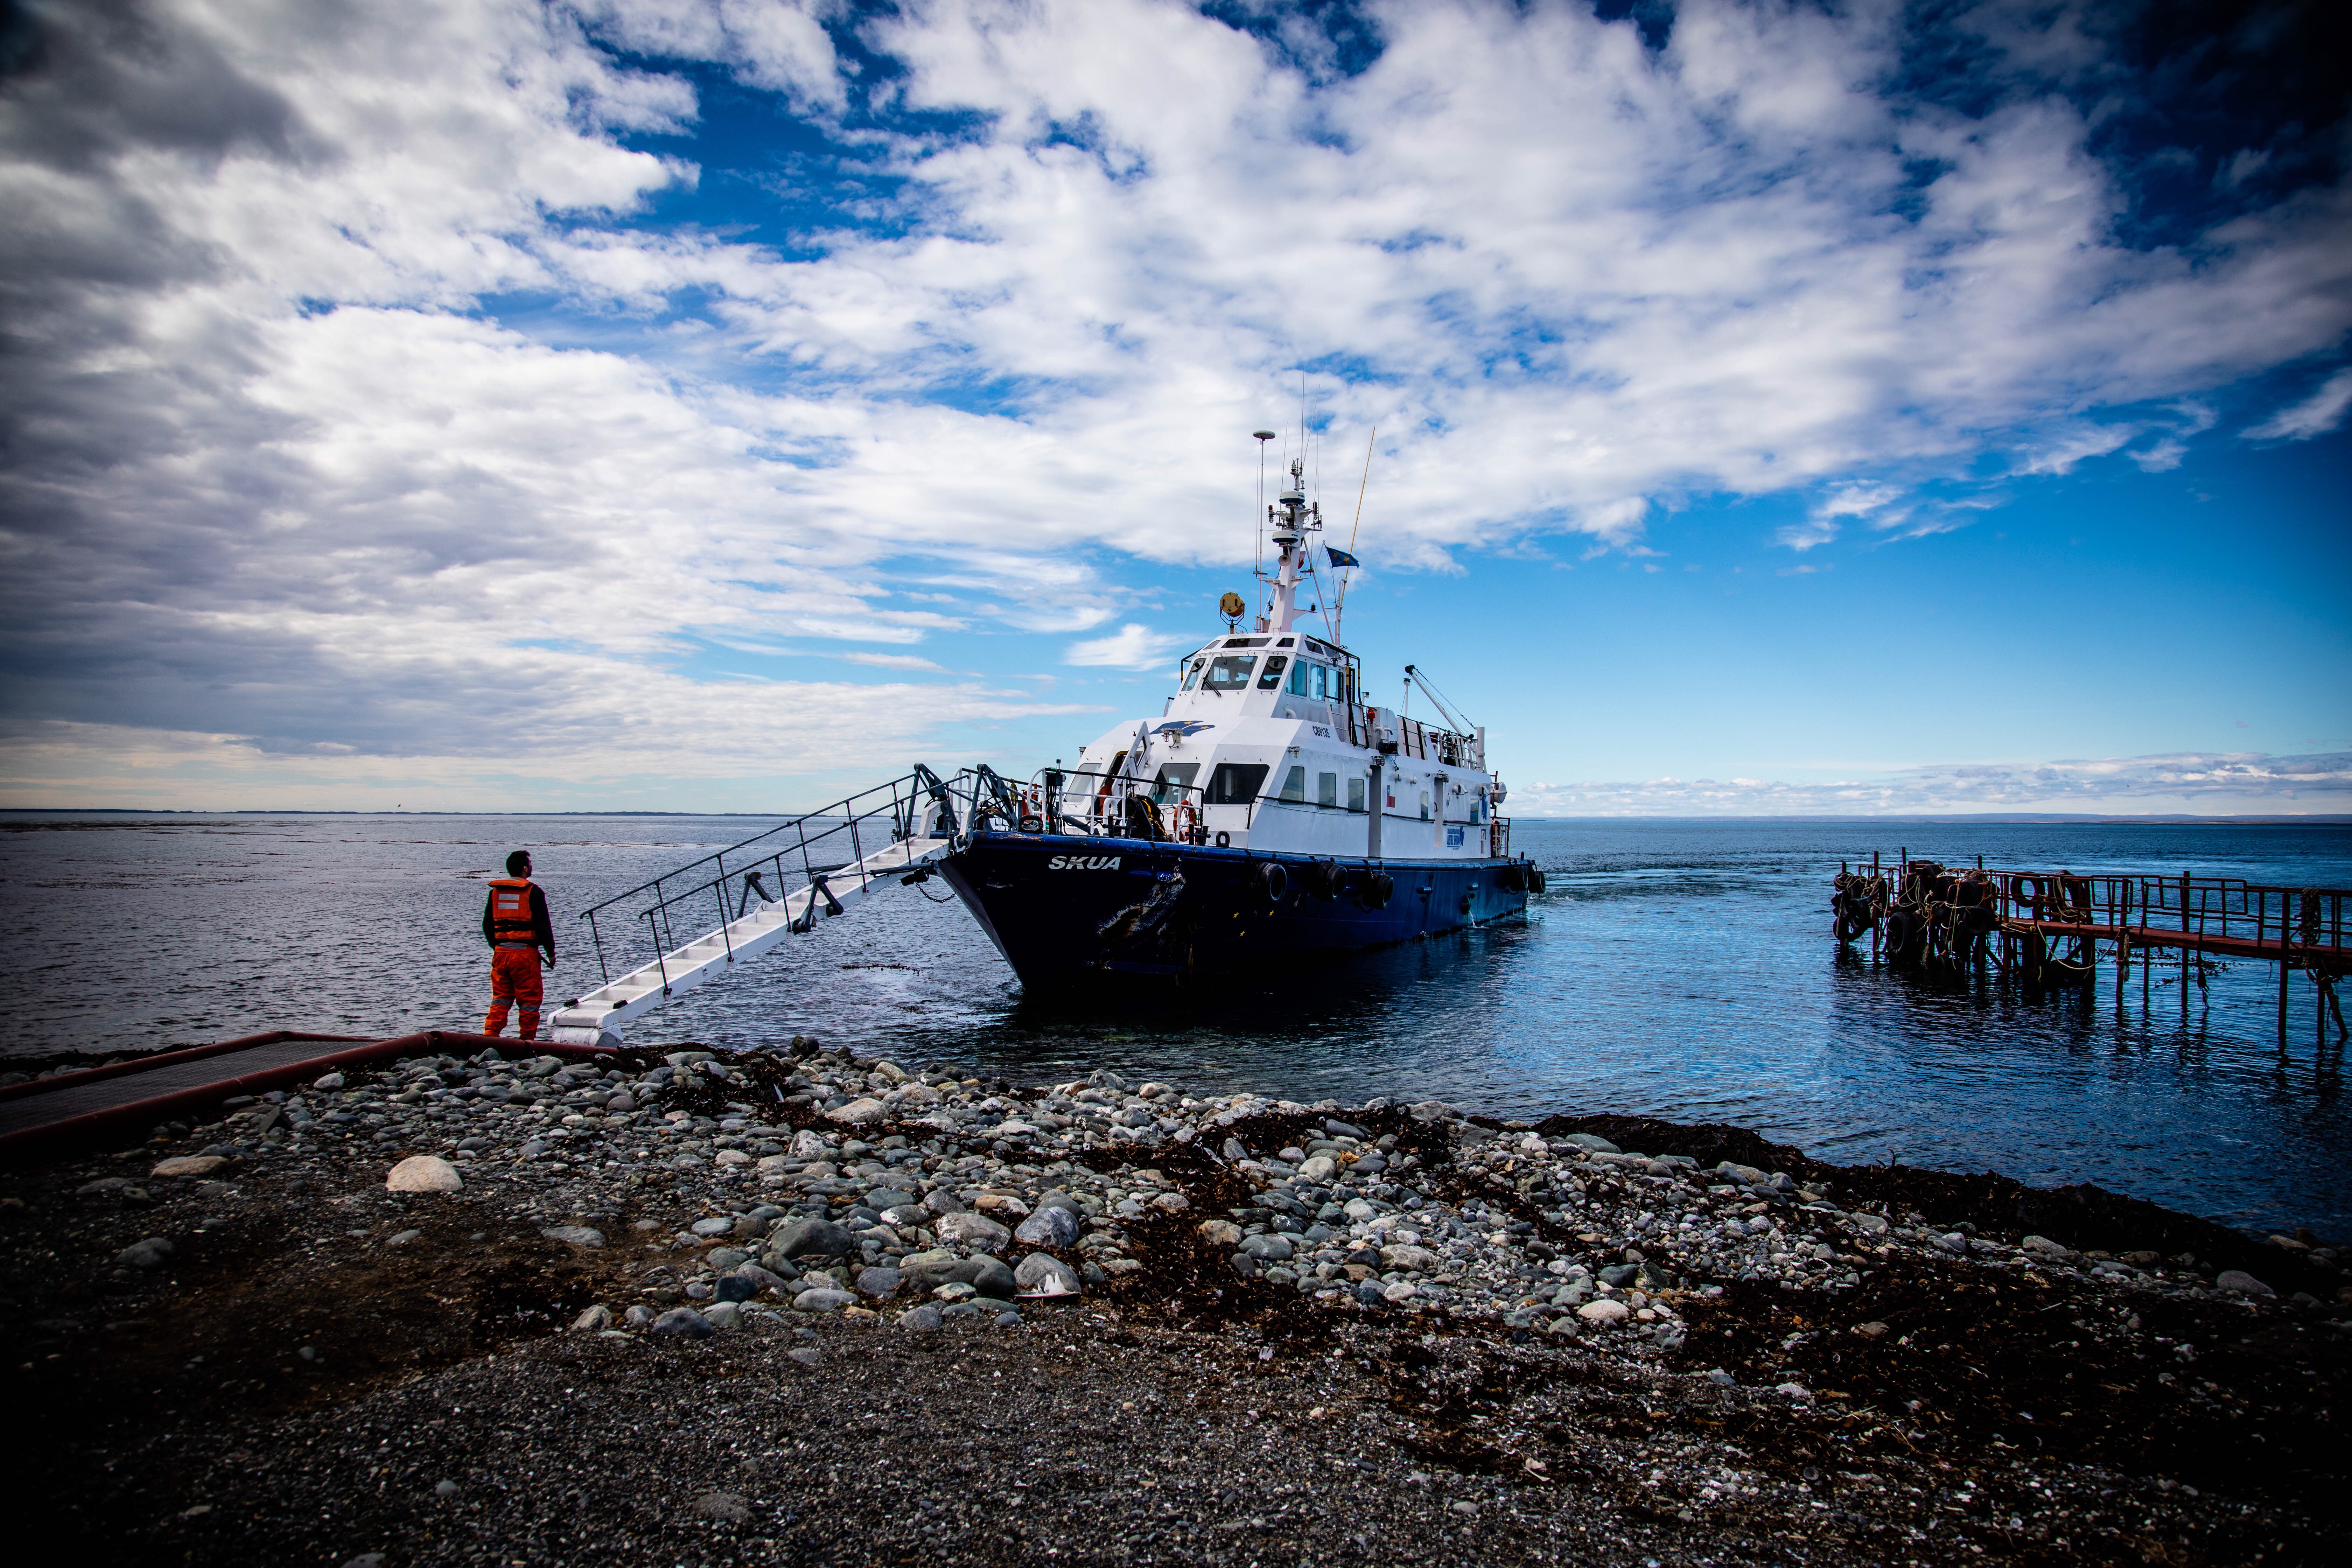 The ferry that gets you from Punta Arenas to Magdalena Island to see the Penguins